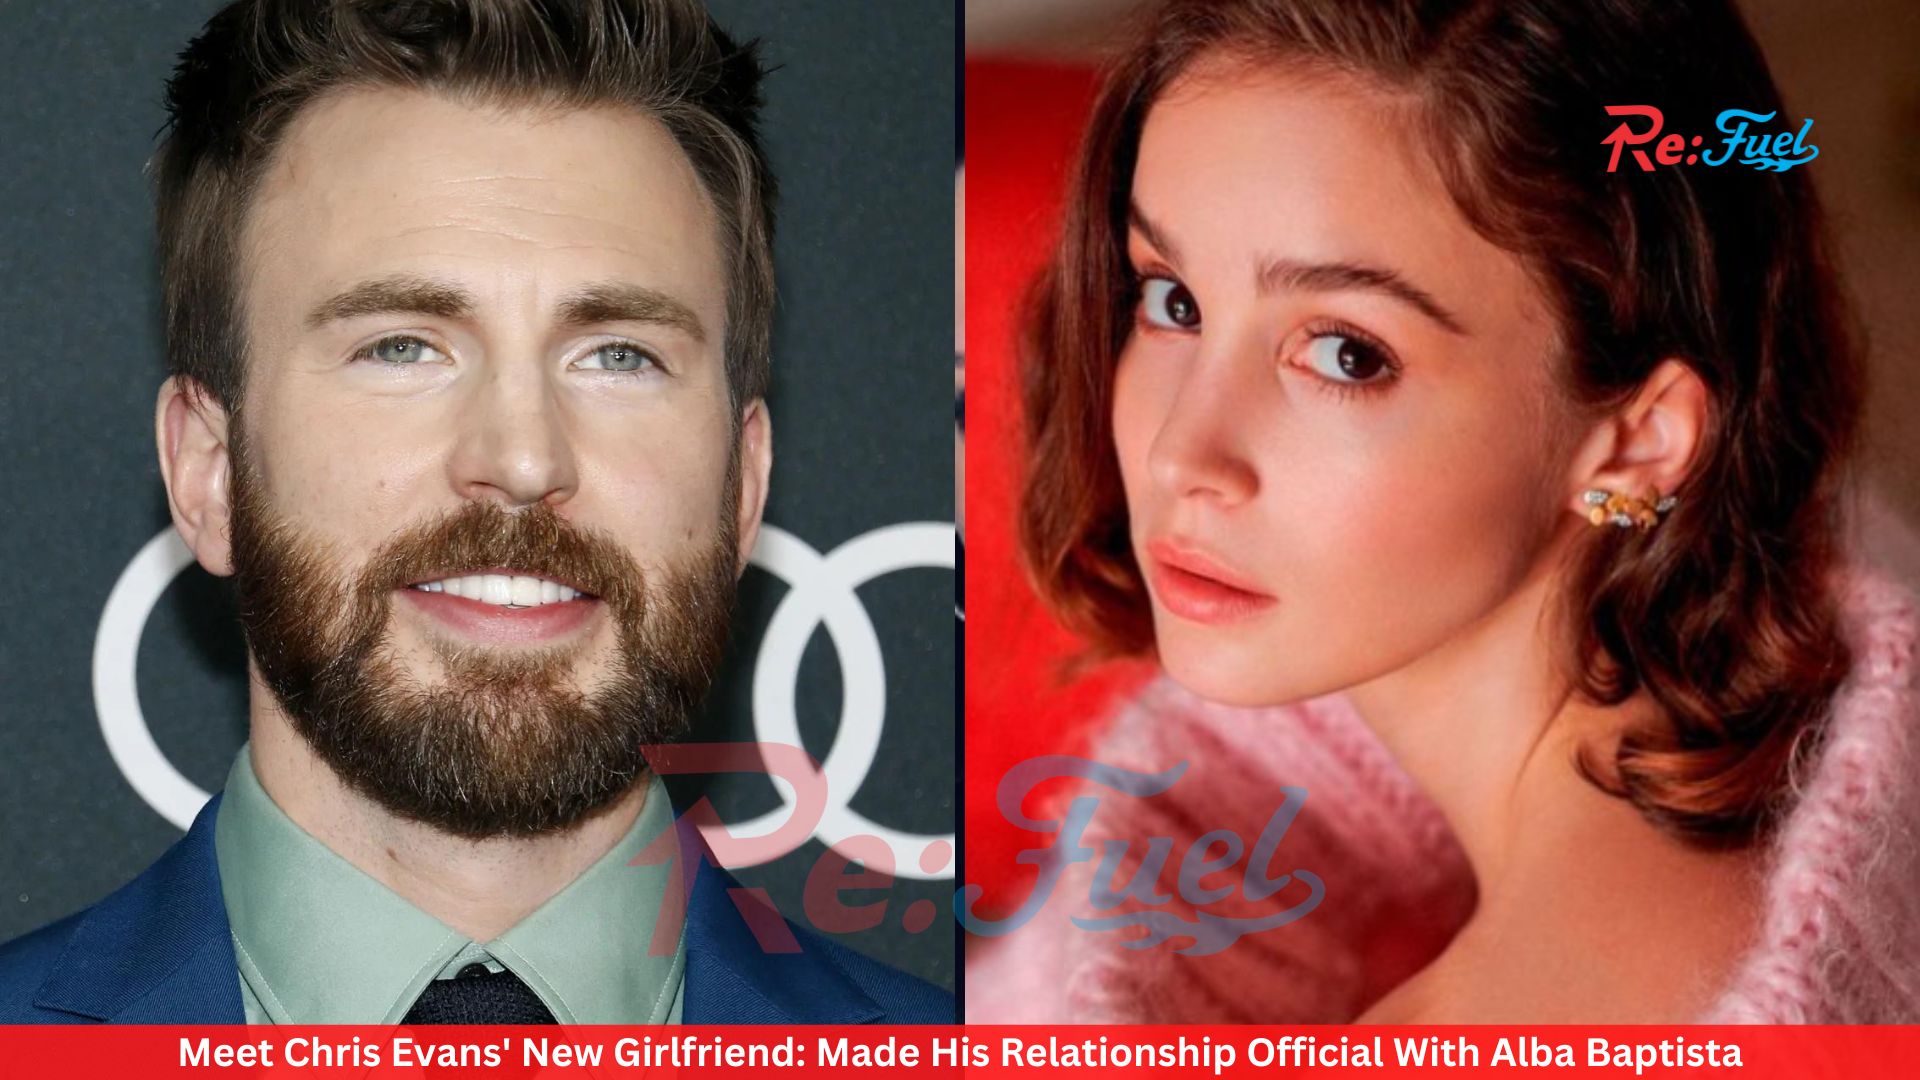 Meet Chris Evans' New Girlfriend: Made His Relationship Official With Alba Baptista